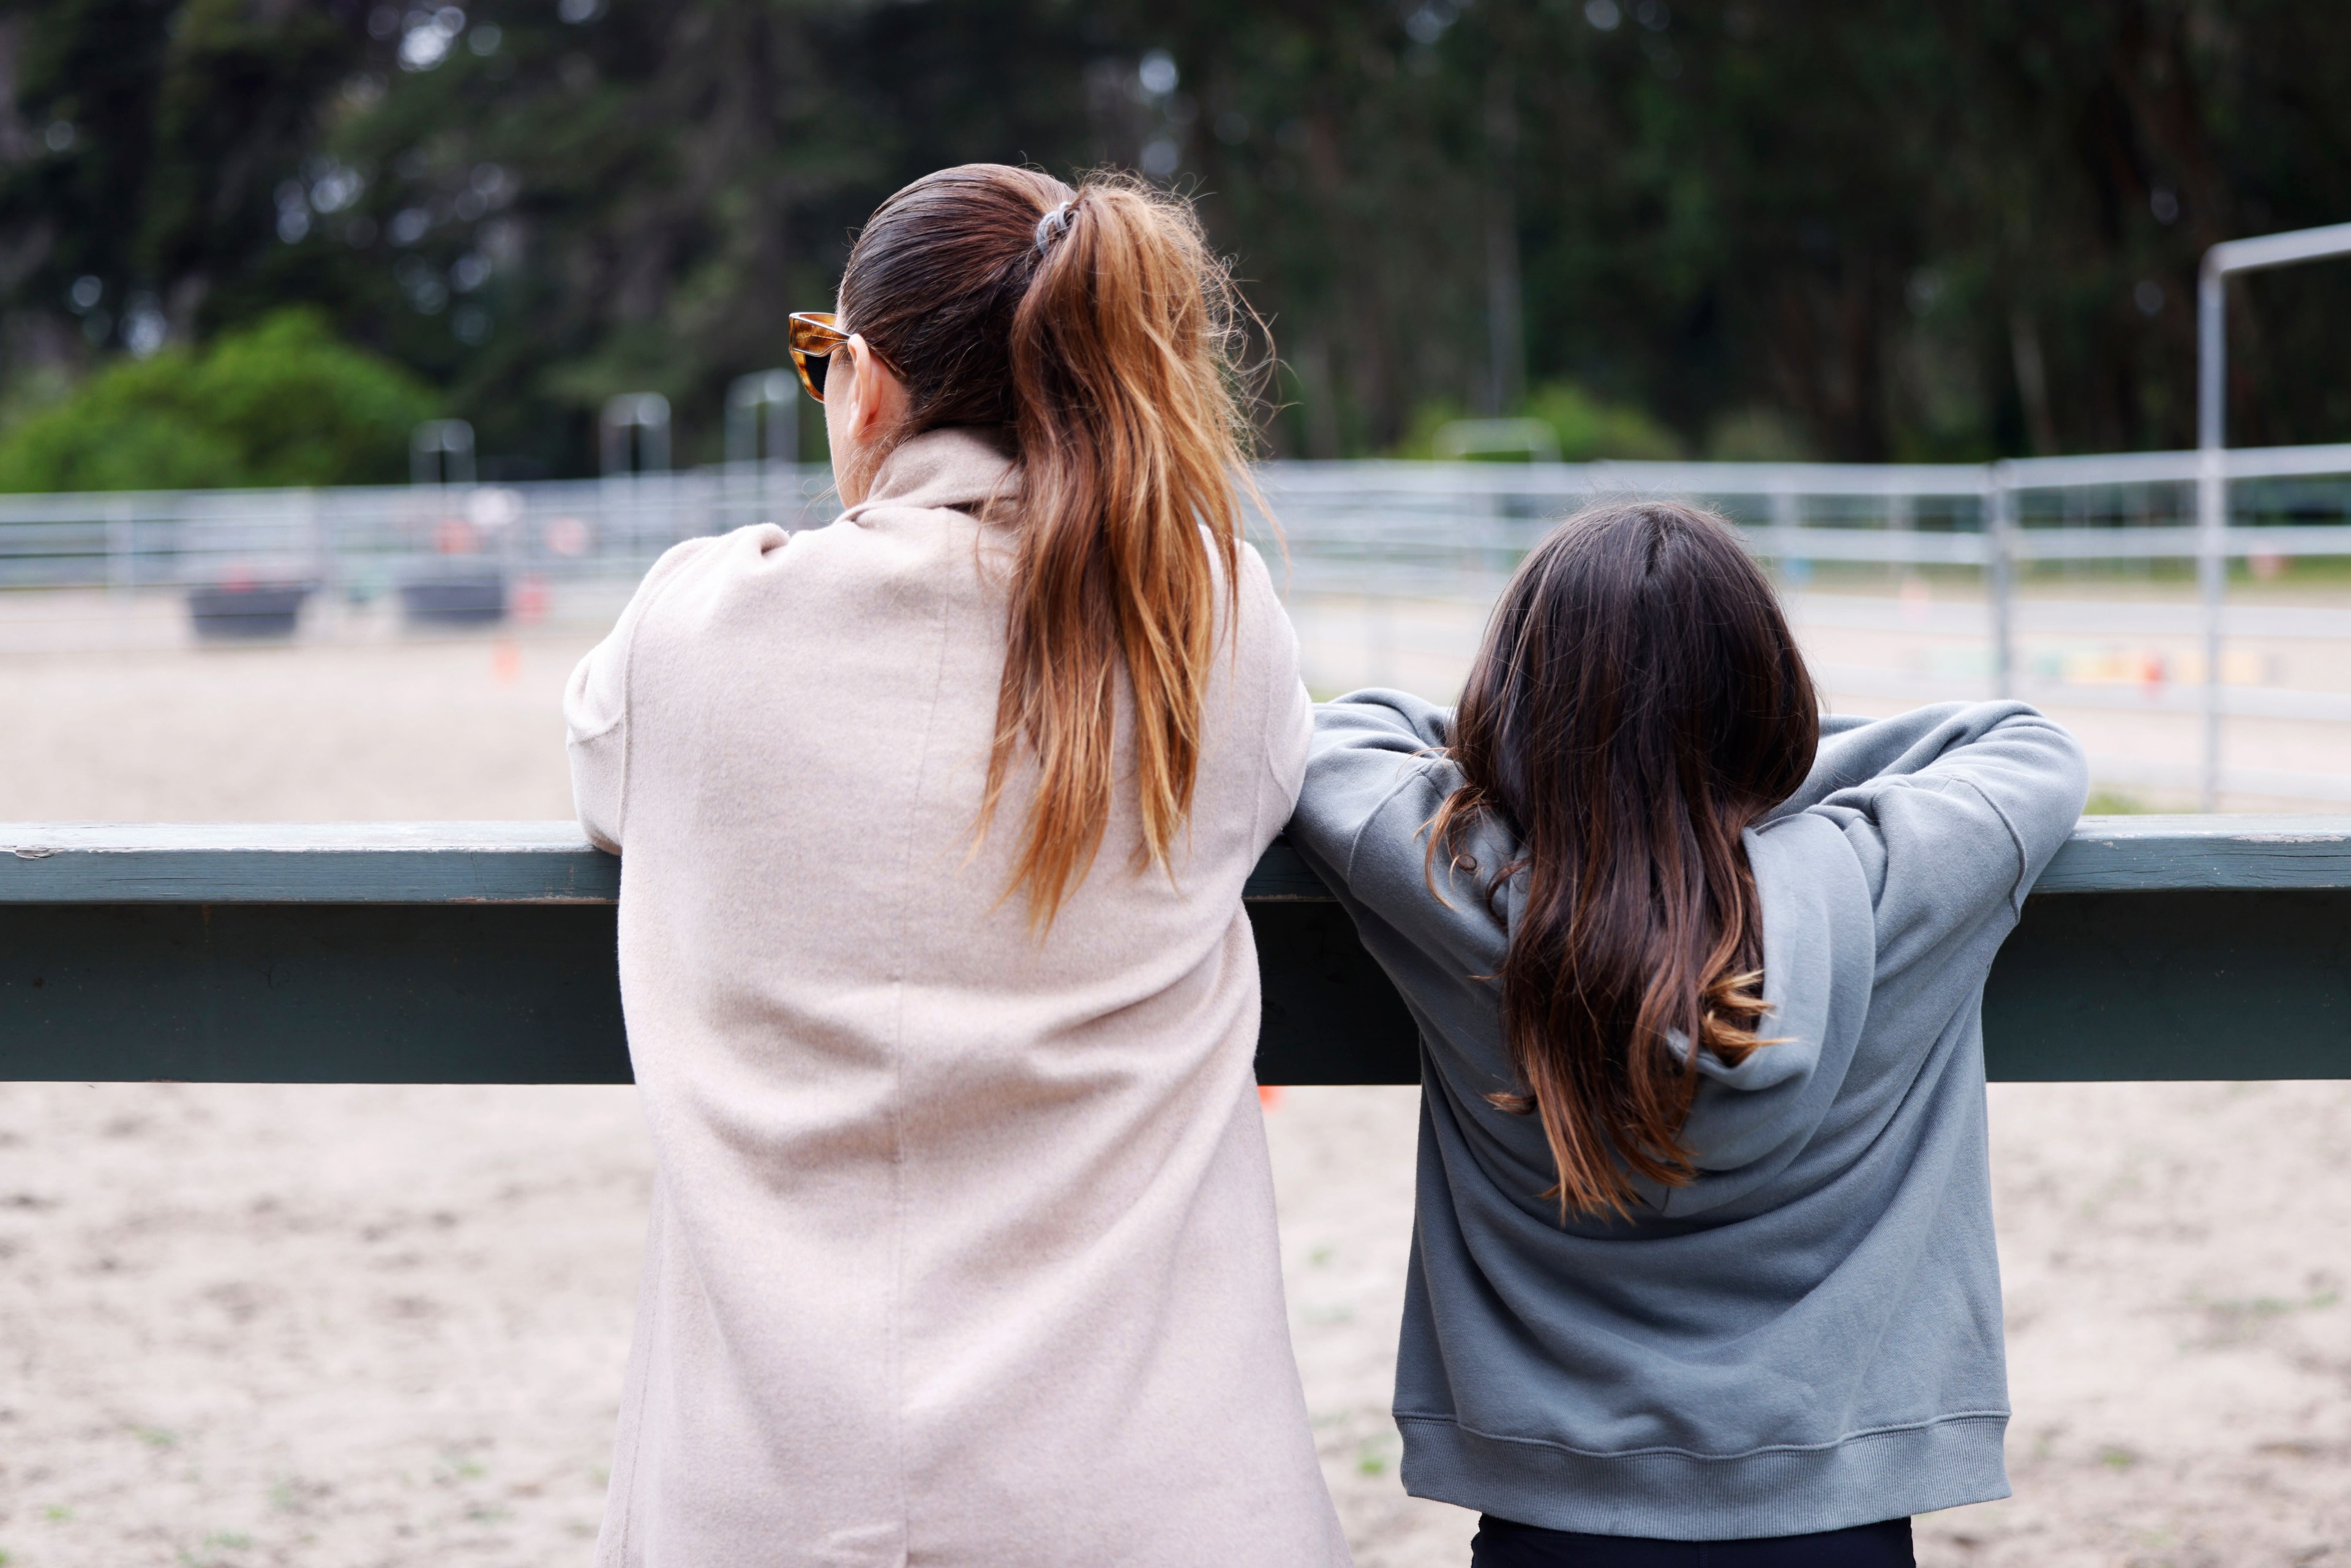 Two women viewed from behind, leaning on a fence at a park, watching a distant scene, surrounded by trees. One wears a beige coat, and the other a grey hoodie.